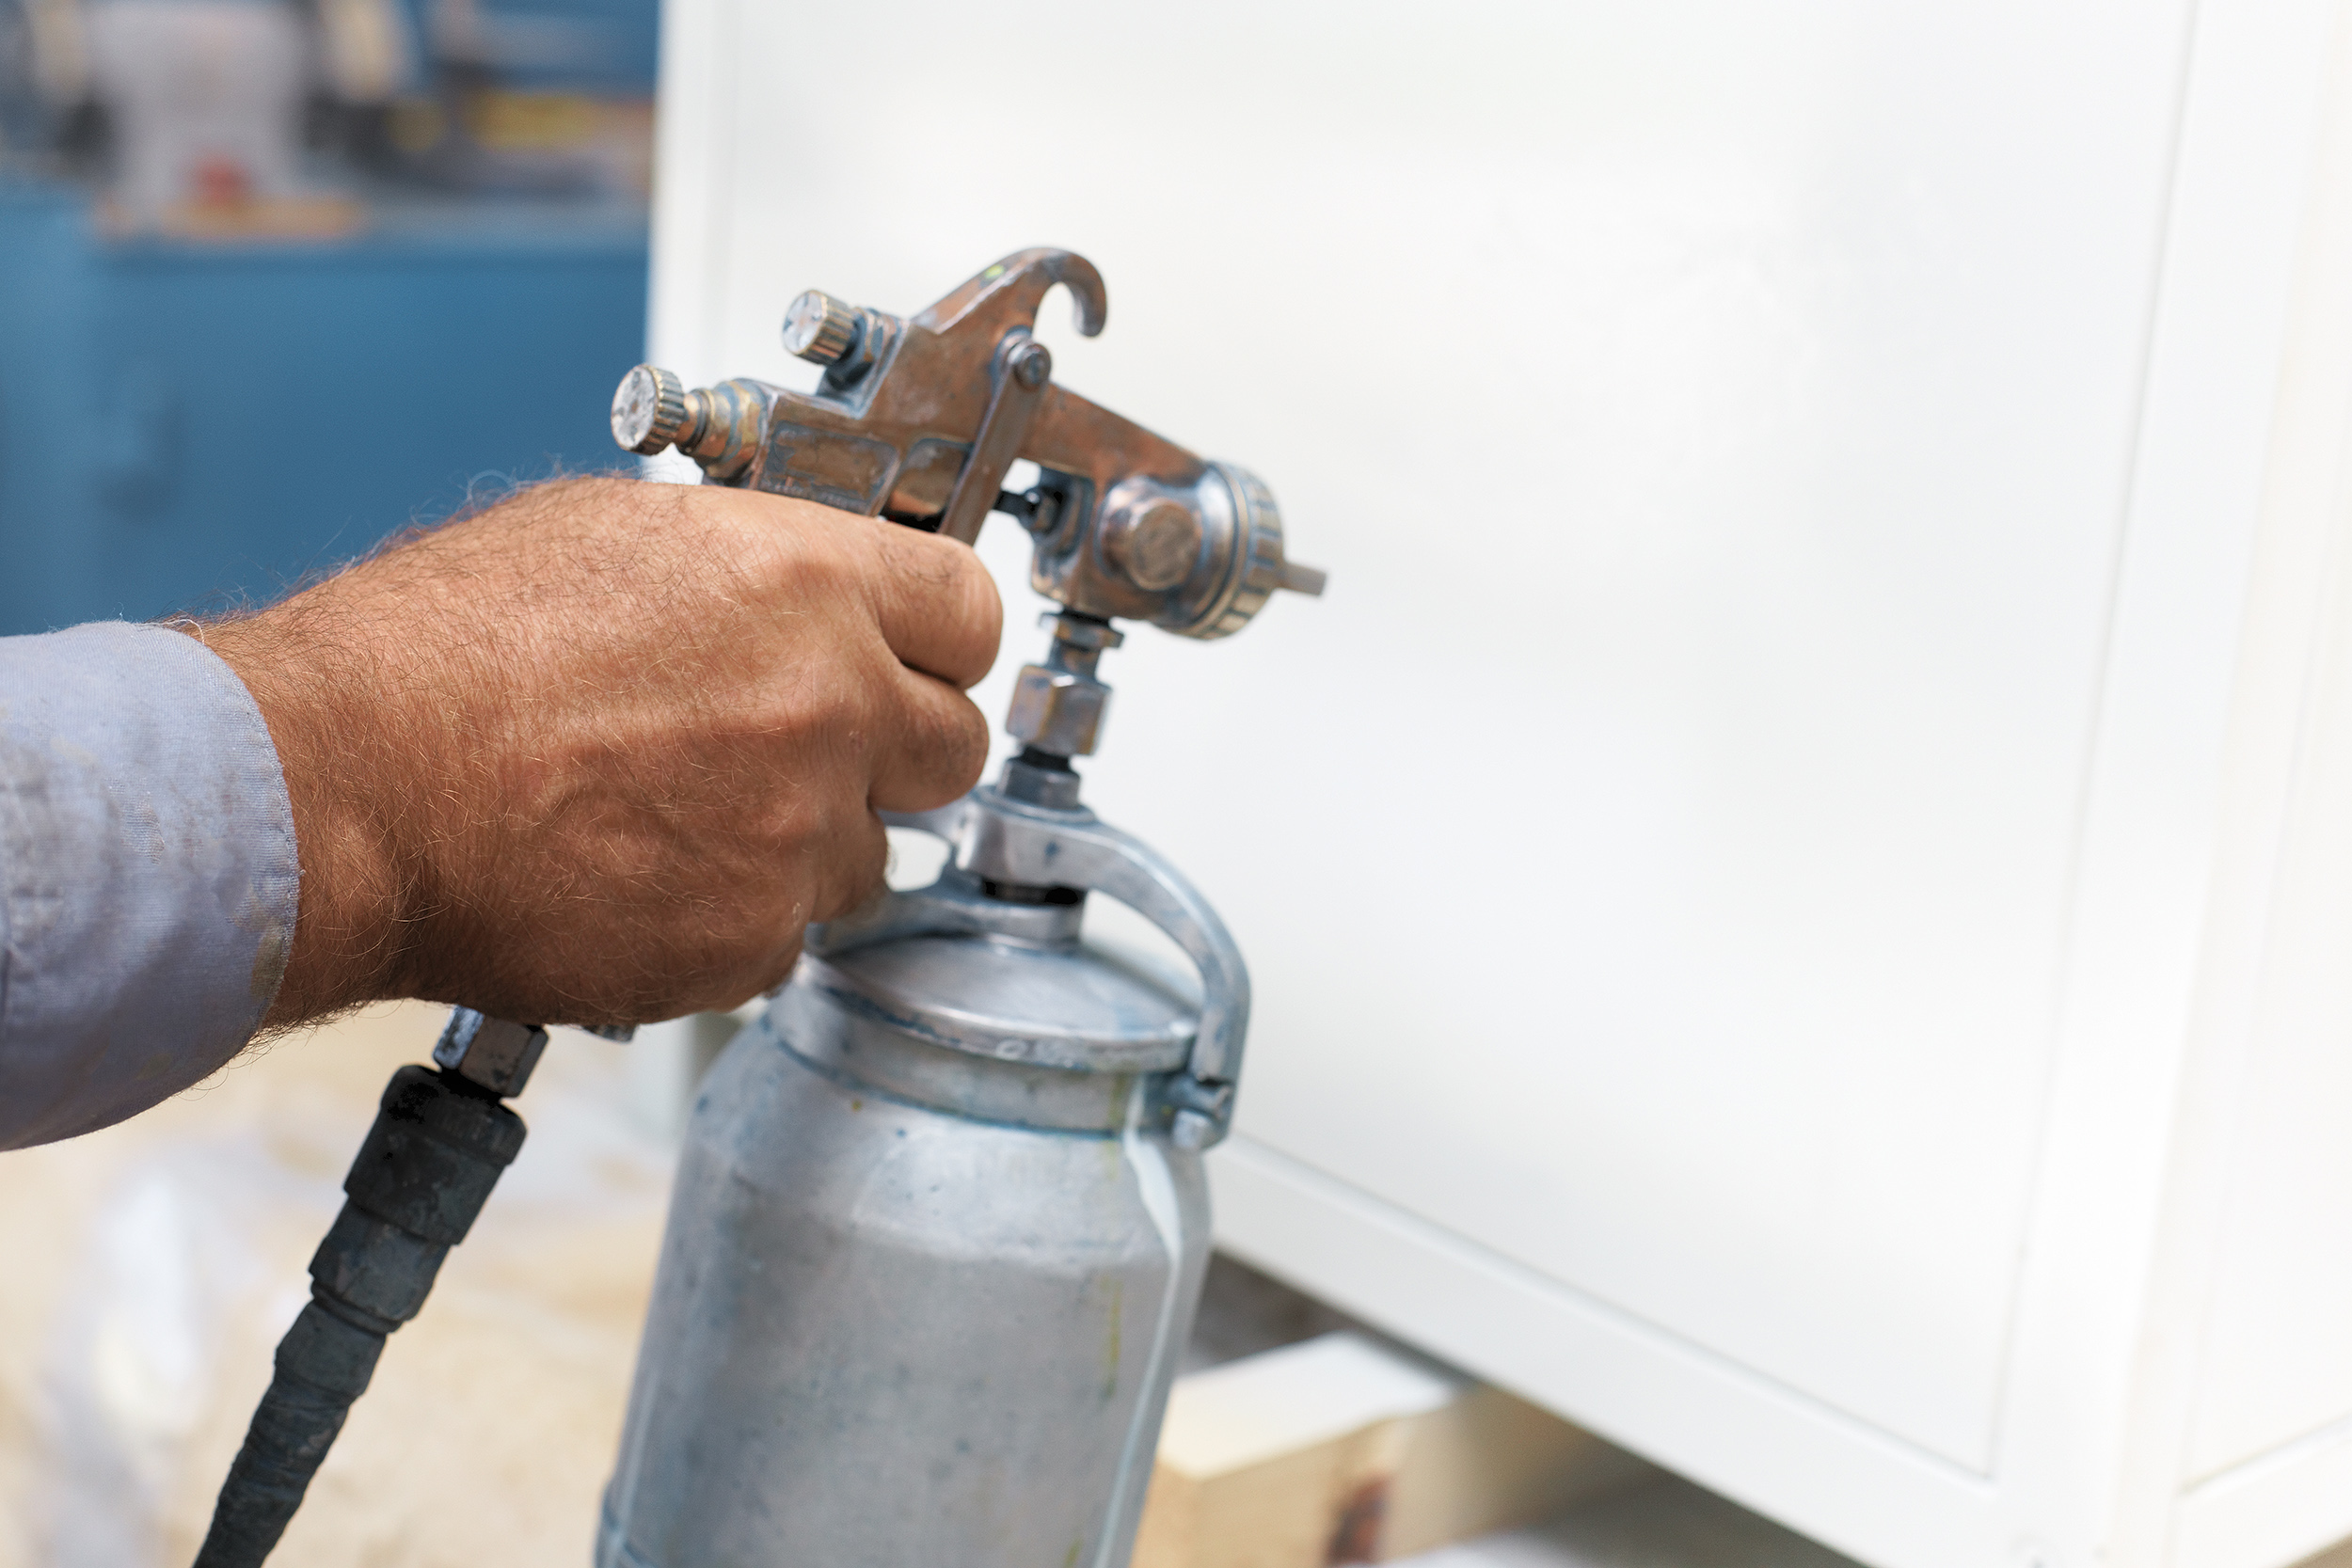 Painting of a metal product. A workshop worker holds a compressor spray gun in his hand and paints the Cabinet white. The hand with the tool close up